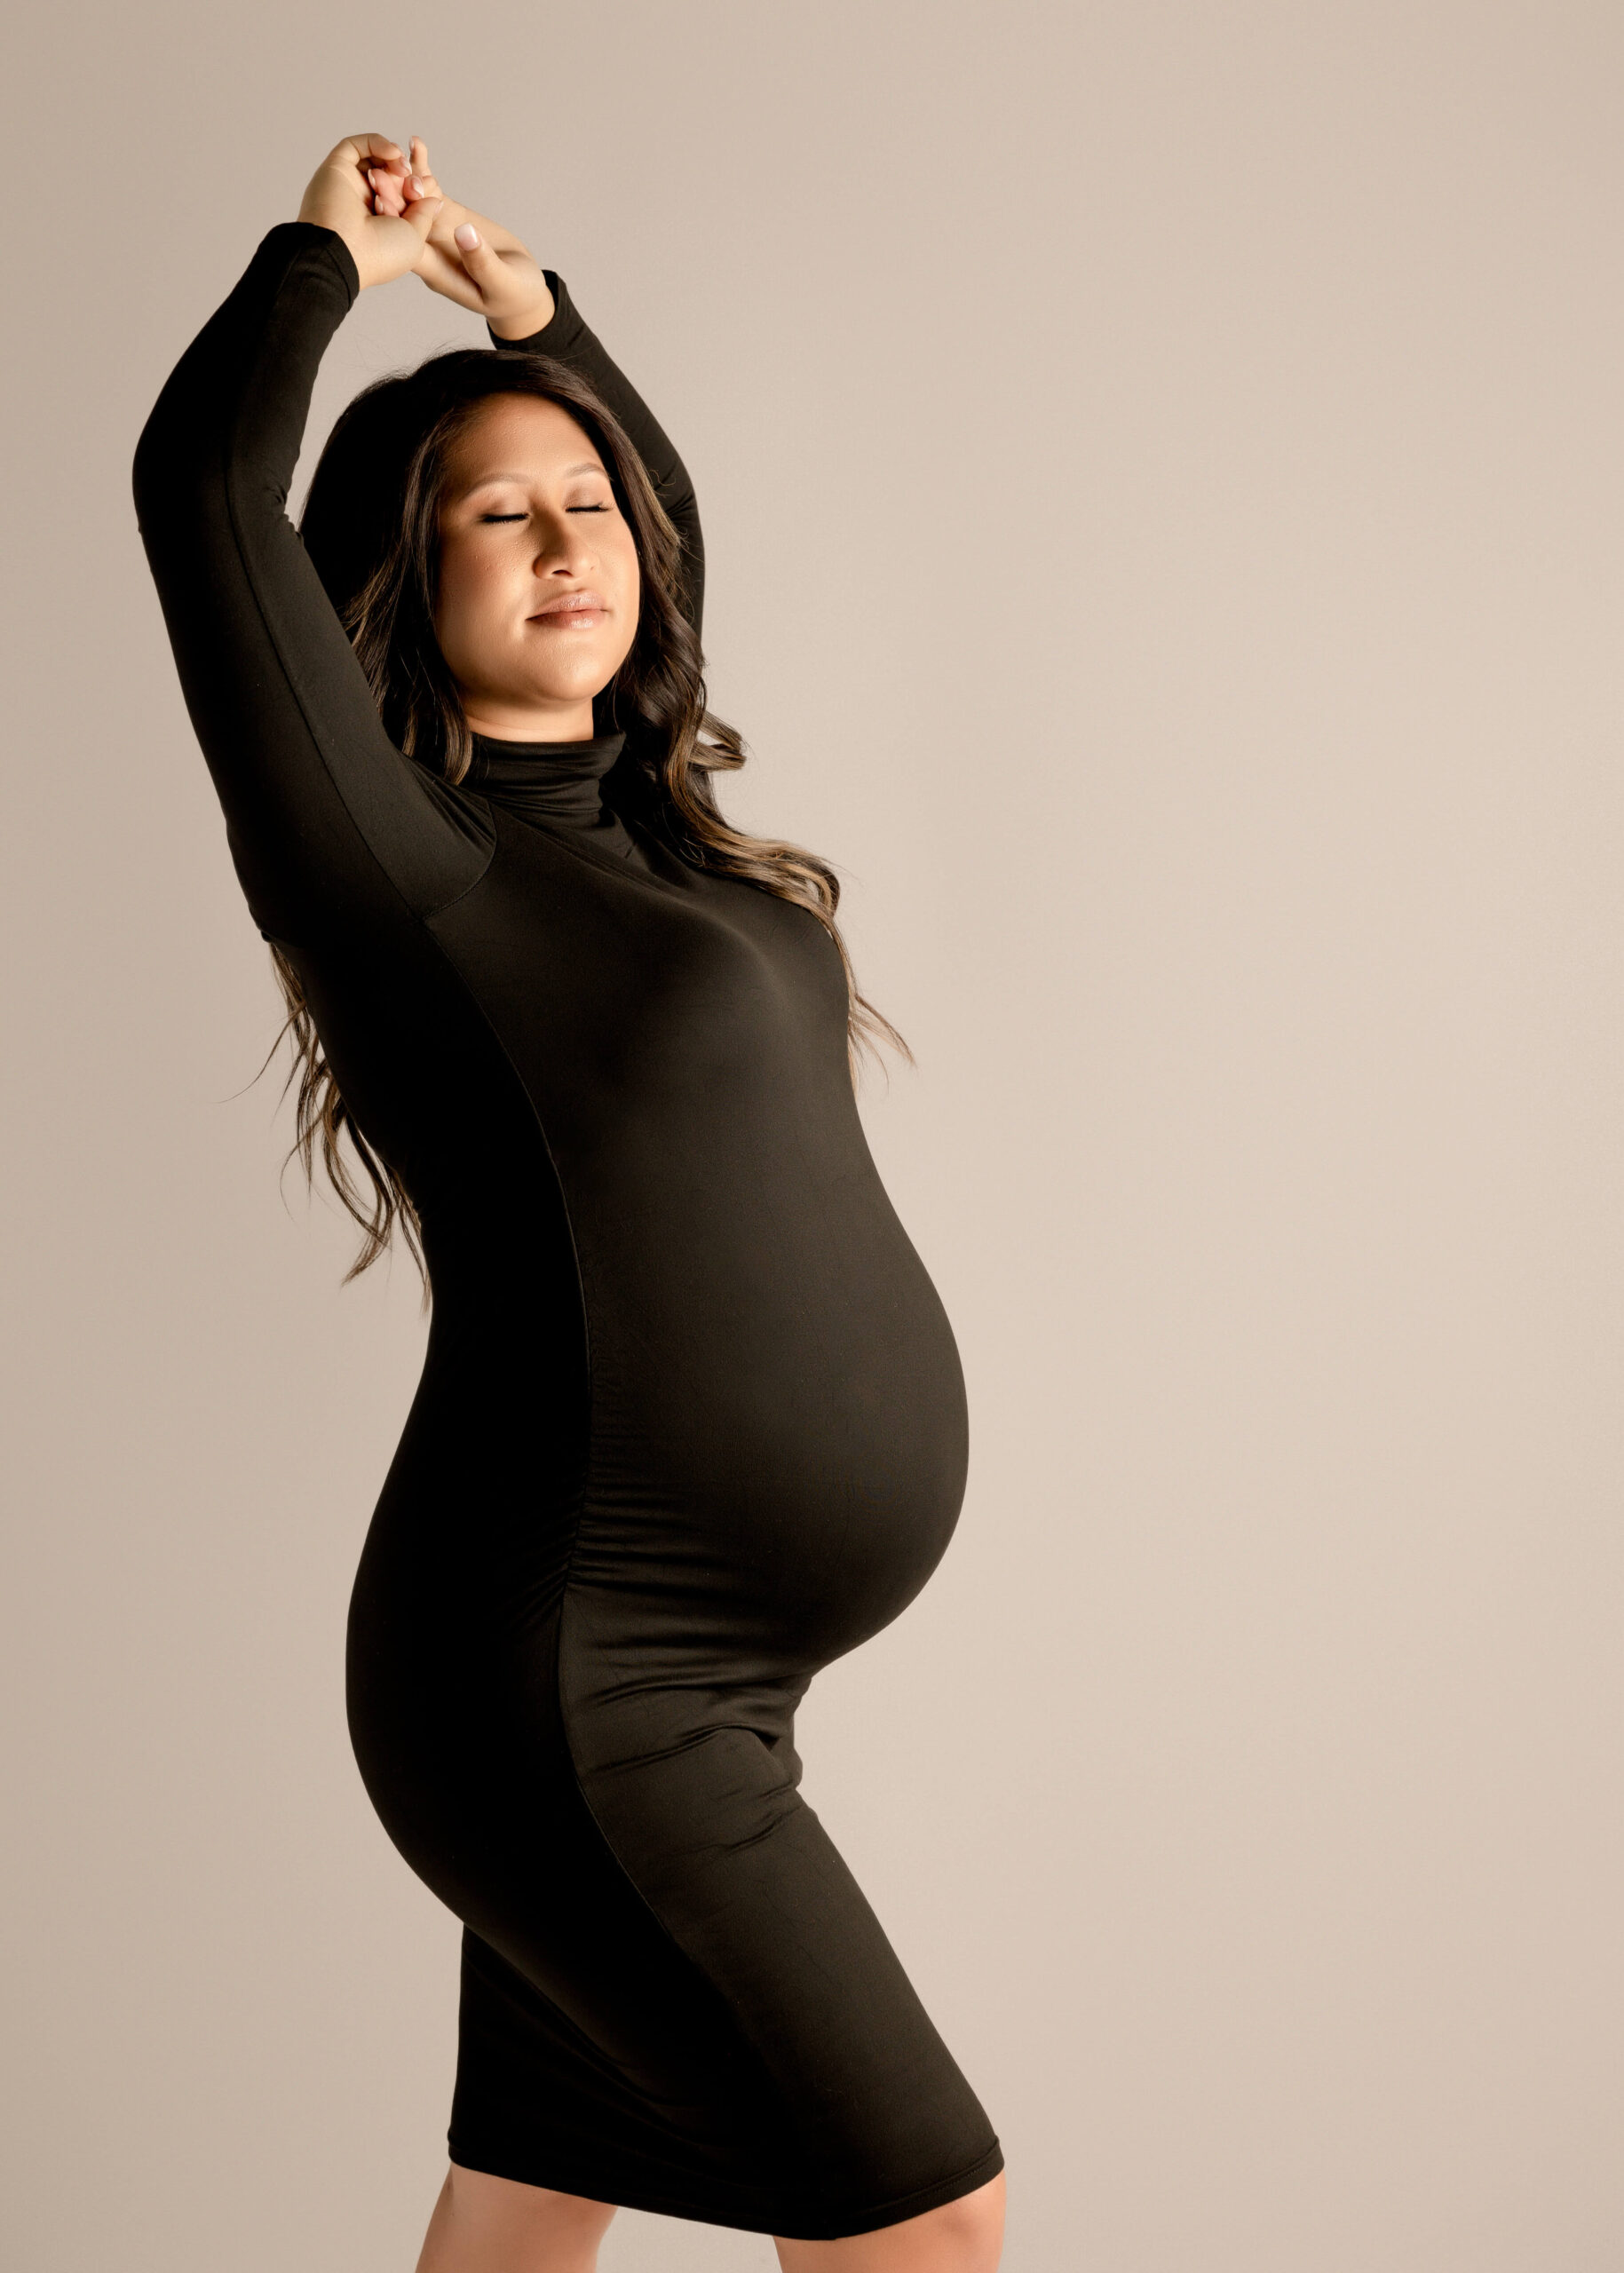 Expectant mom posing in studio with eyes closed for maternity session by Ashley Nicole.